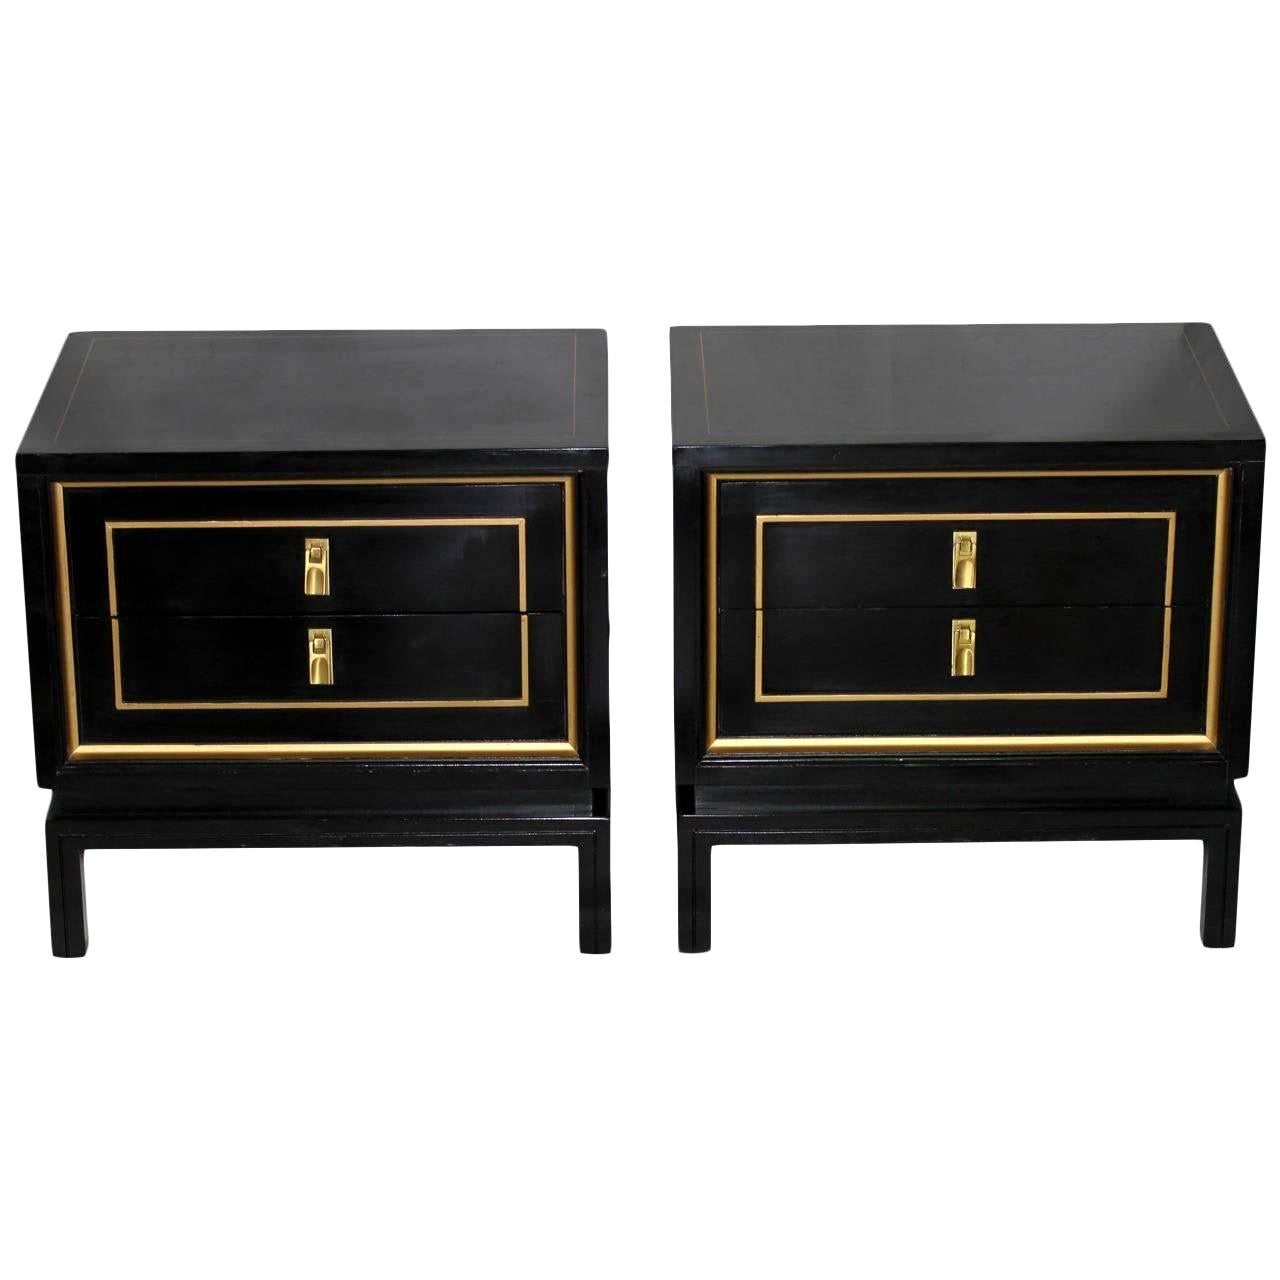 Pair of Black Lacquered and Gold Nightstands or End Tables